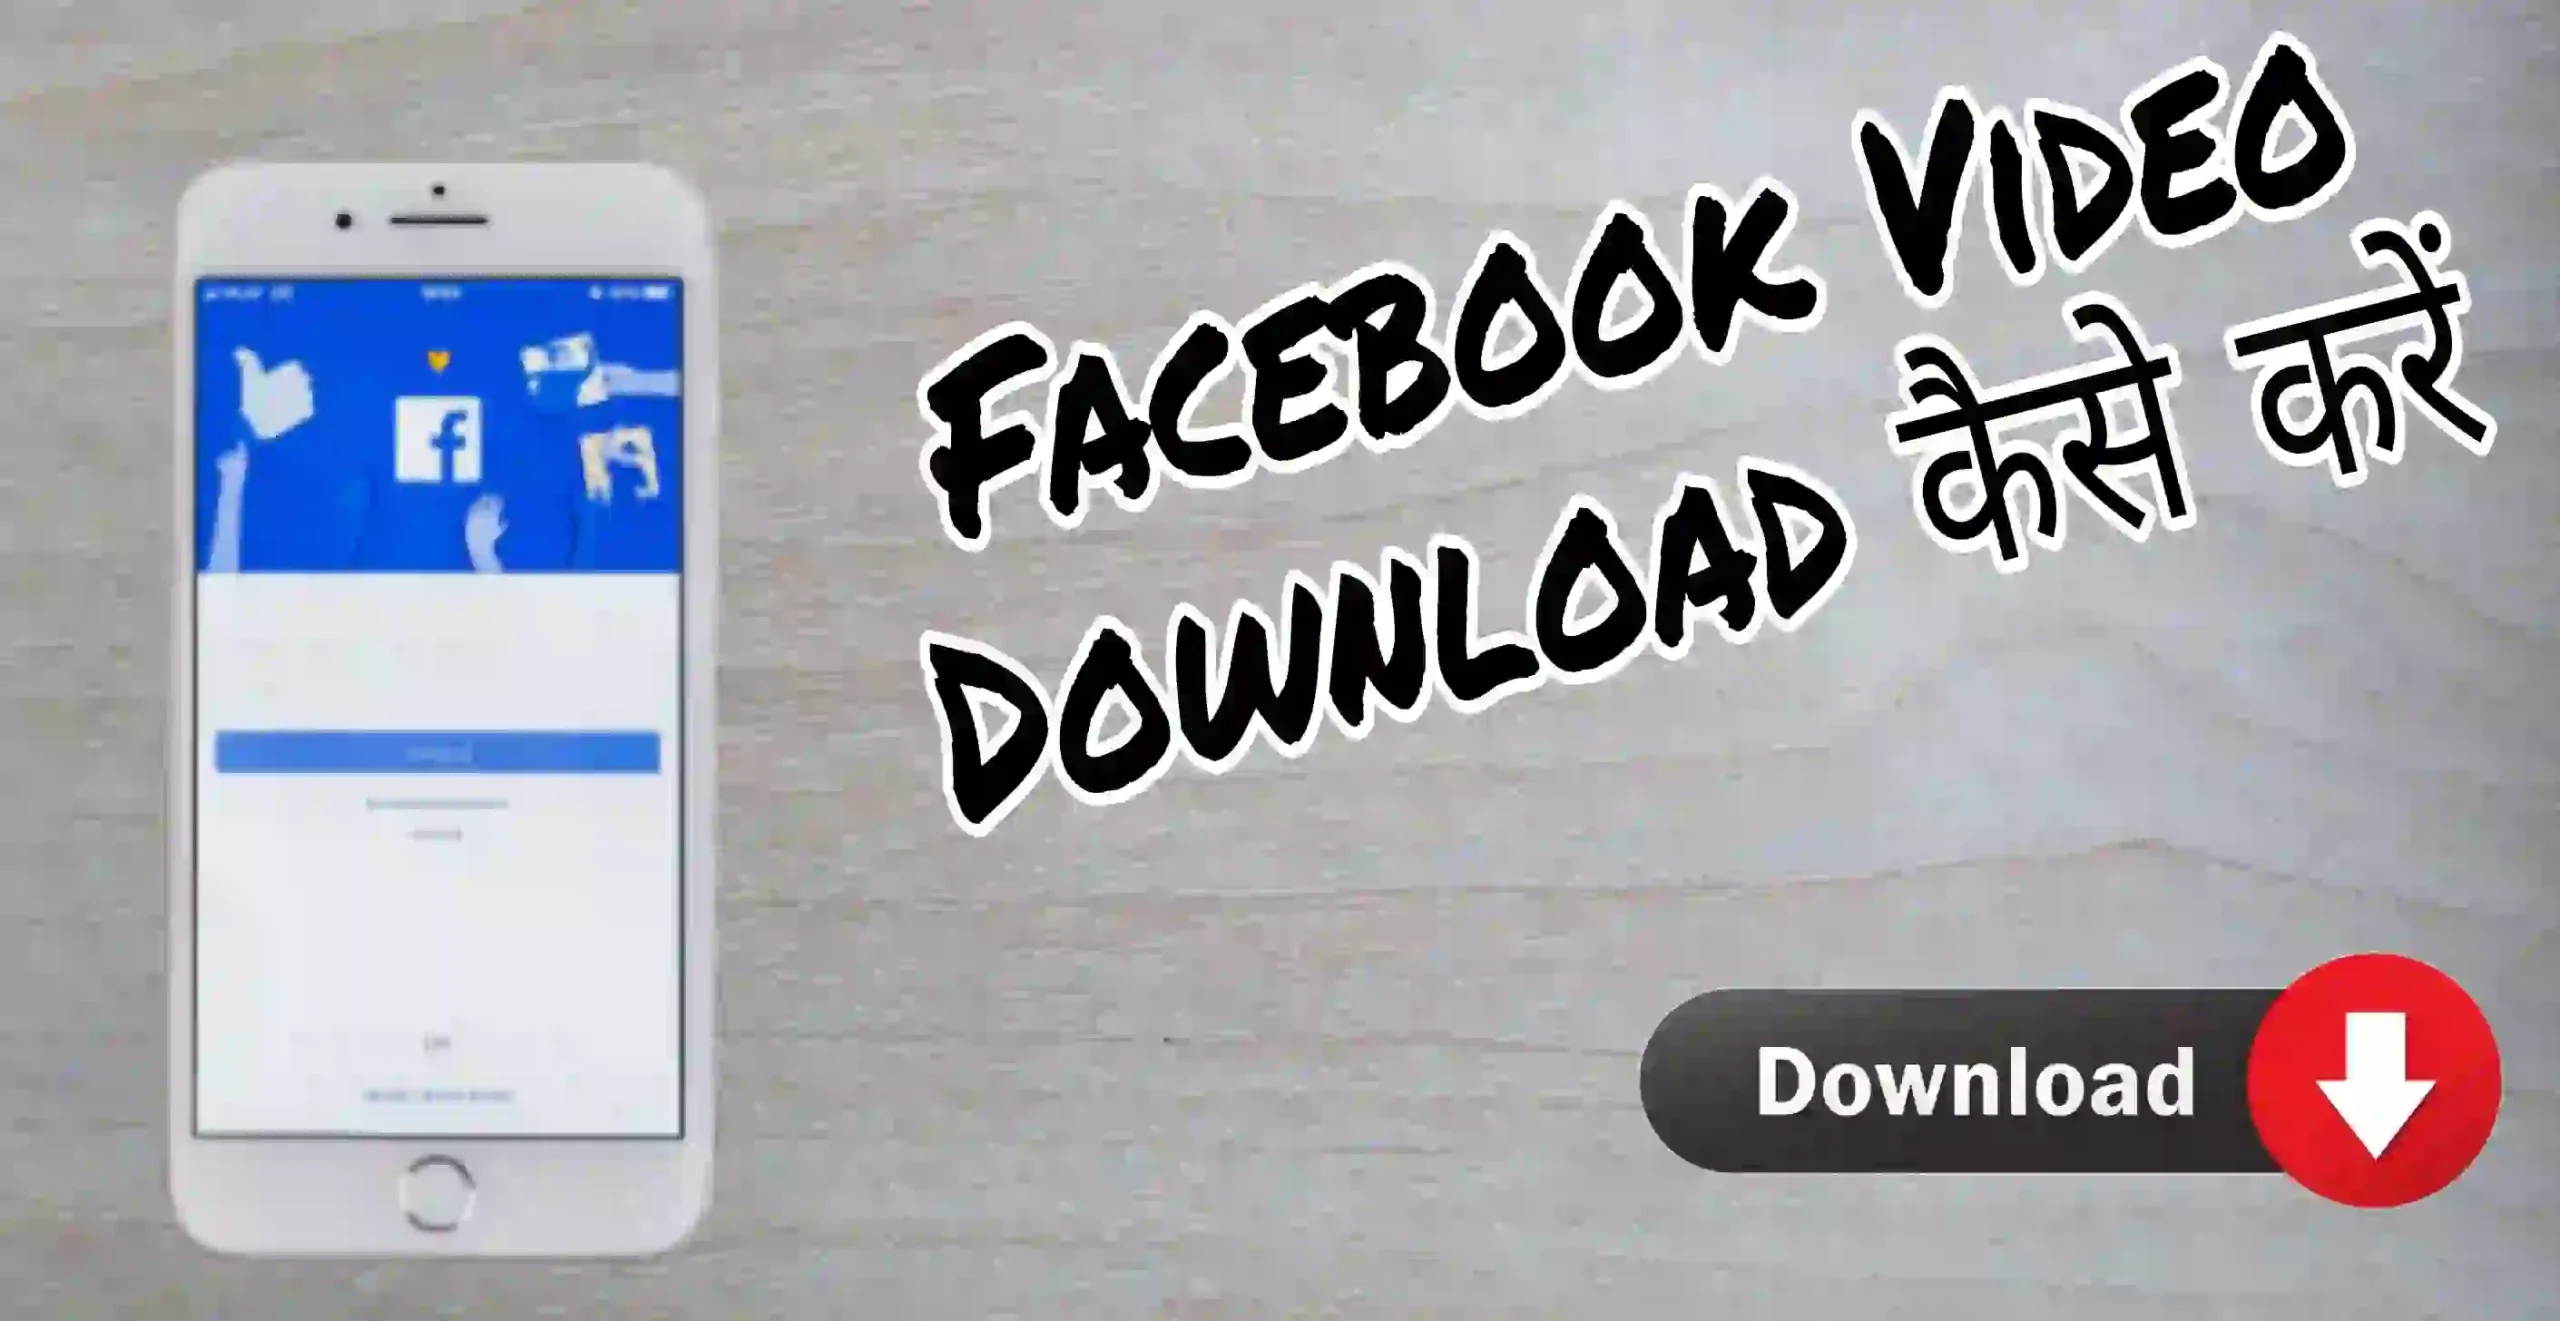 facebook video download kaise kare scaled